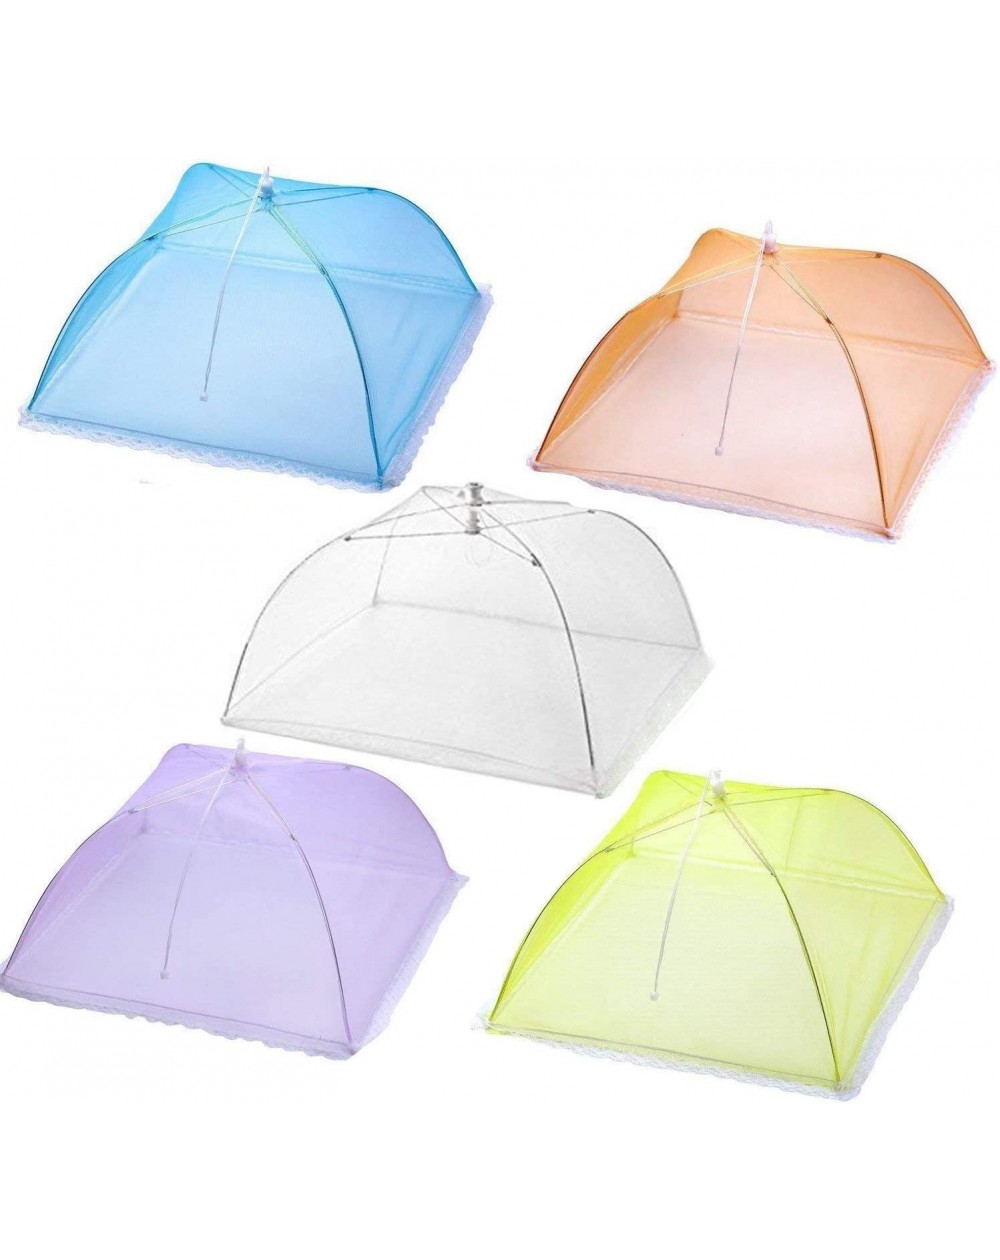 Tablecovers Pop-Up Mesh Large Size Screen Food Cover Tent Umbrella 17in Reusable Collapsible Umbrella Screens to Keep Bugs Fl...